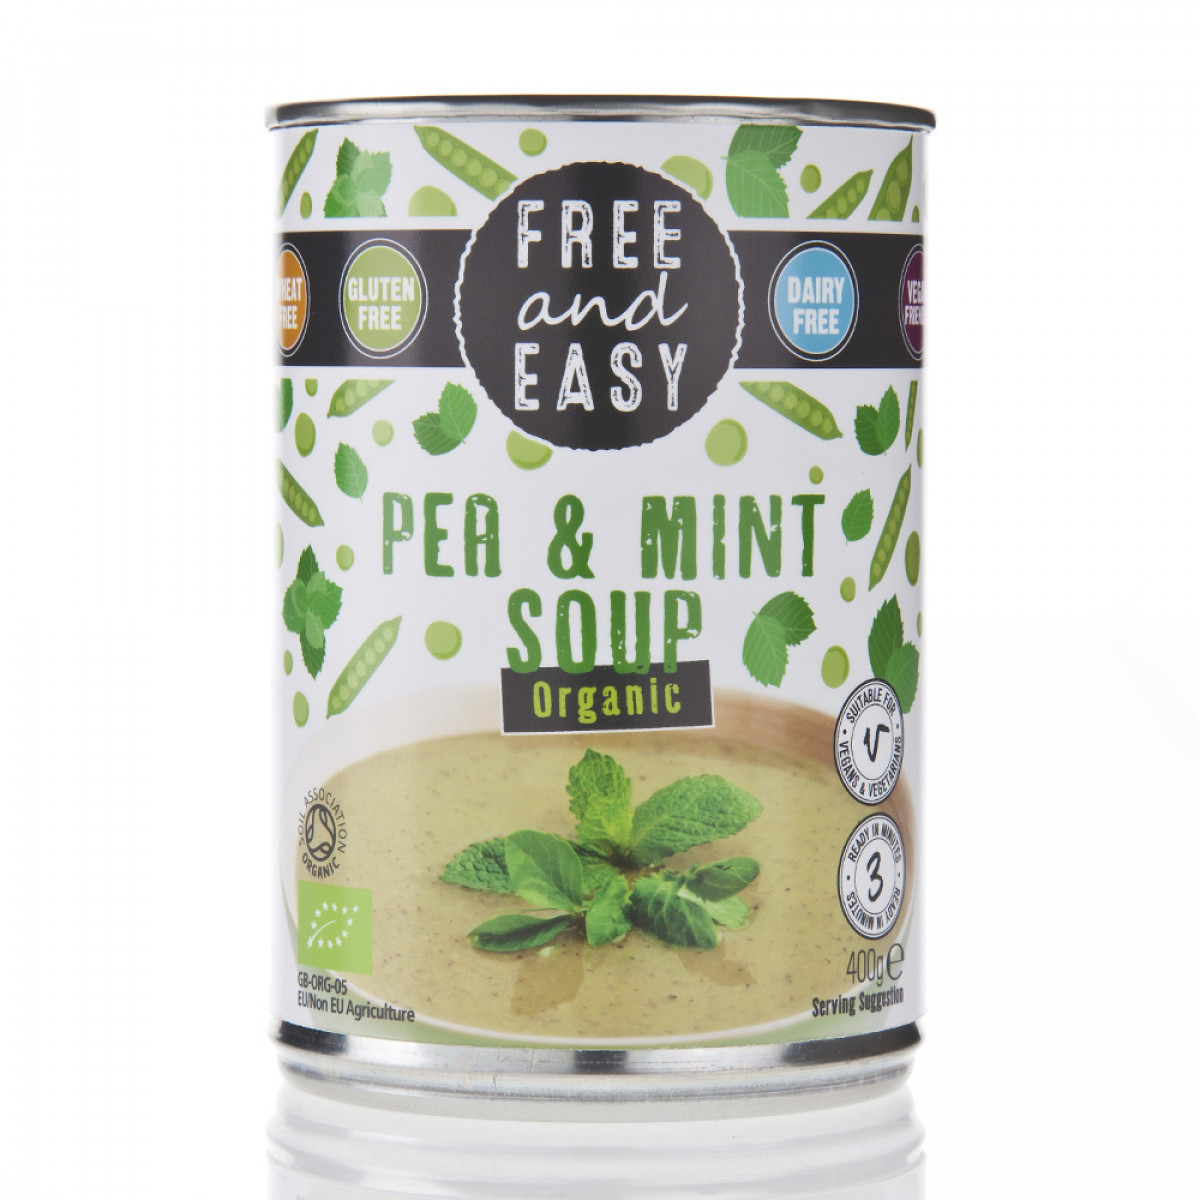 Product picture for Soup - Pea & Mint